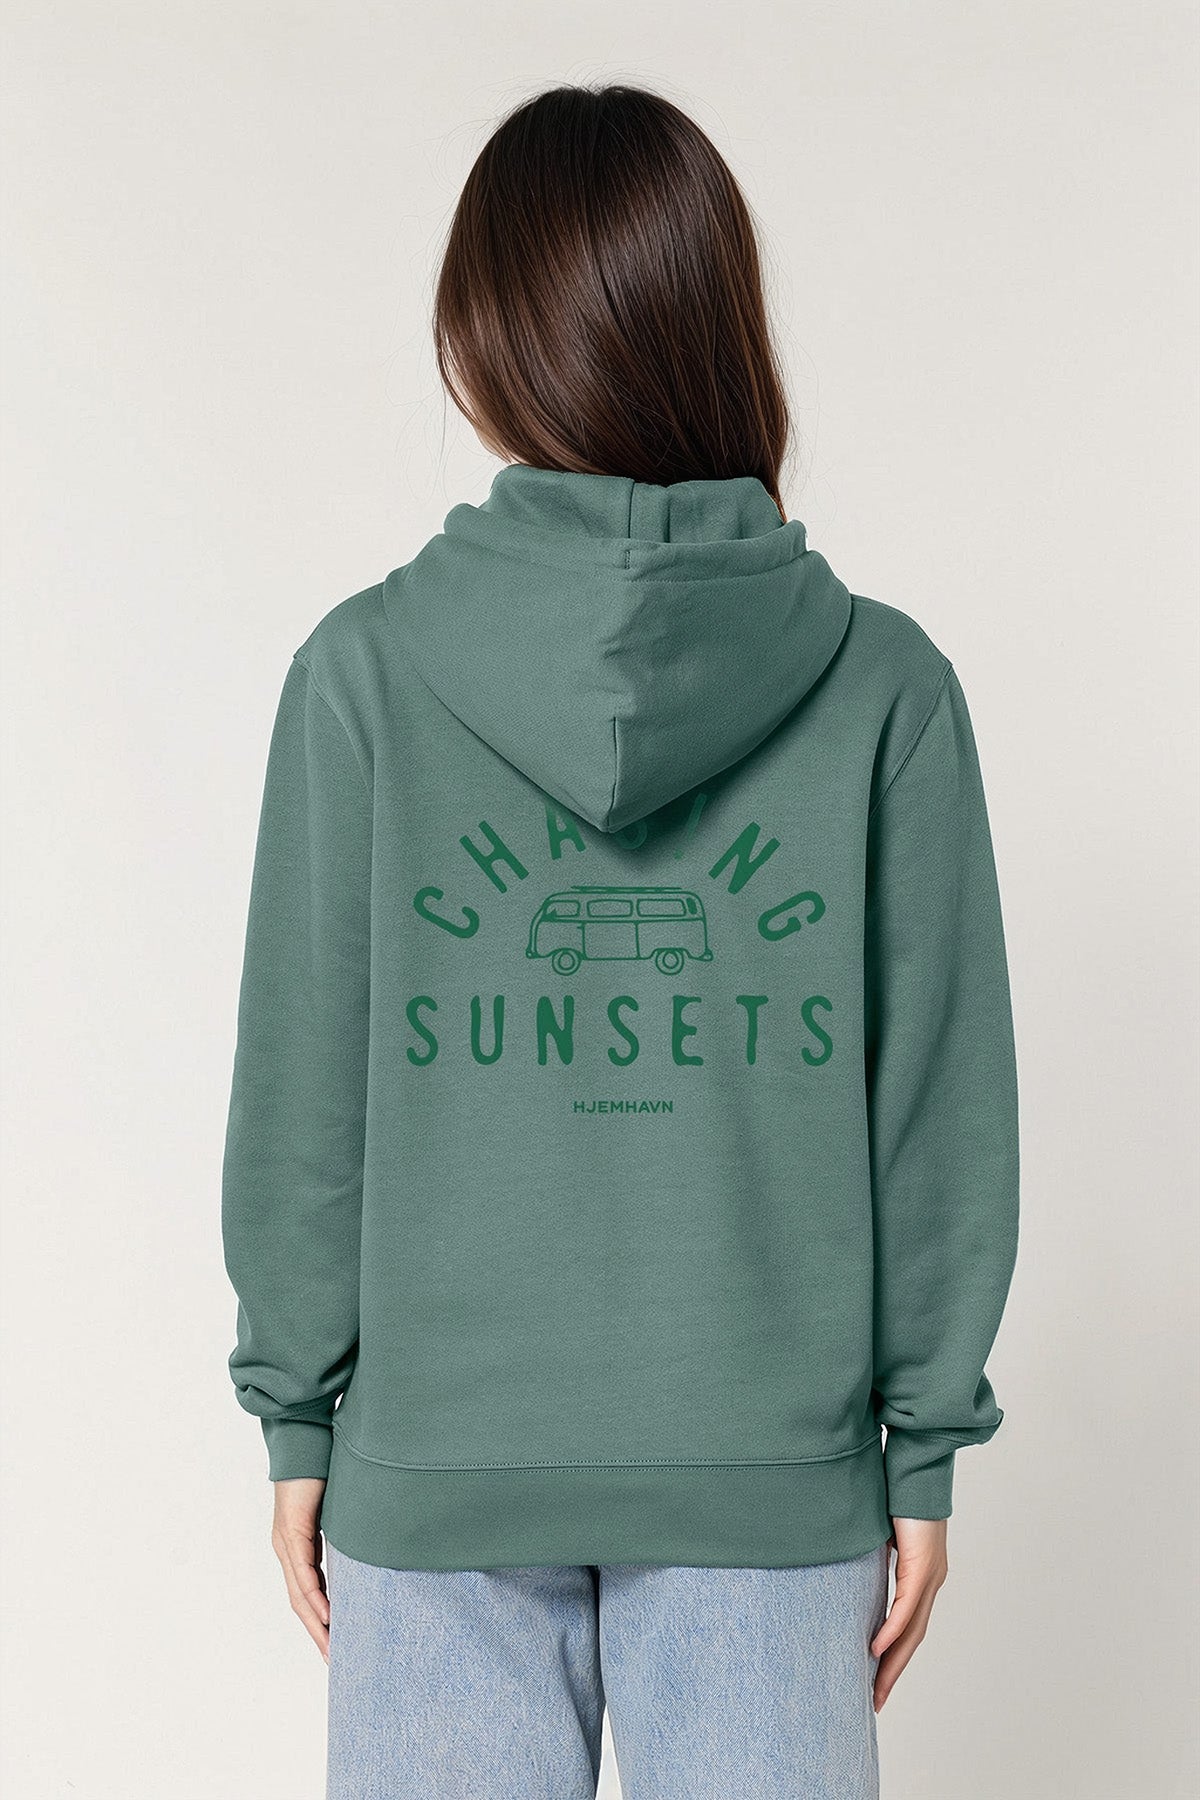 Hoodie "Chasing Sunsets"